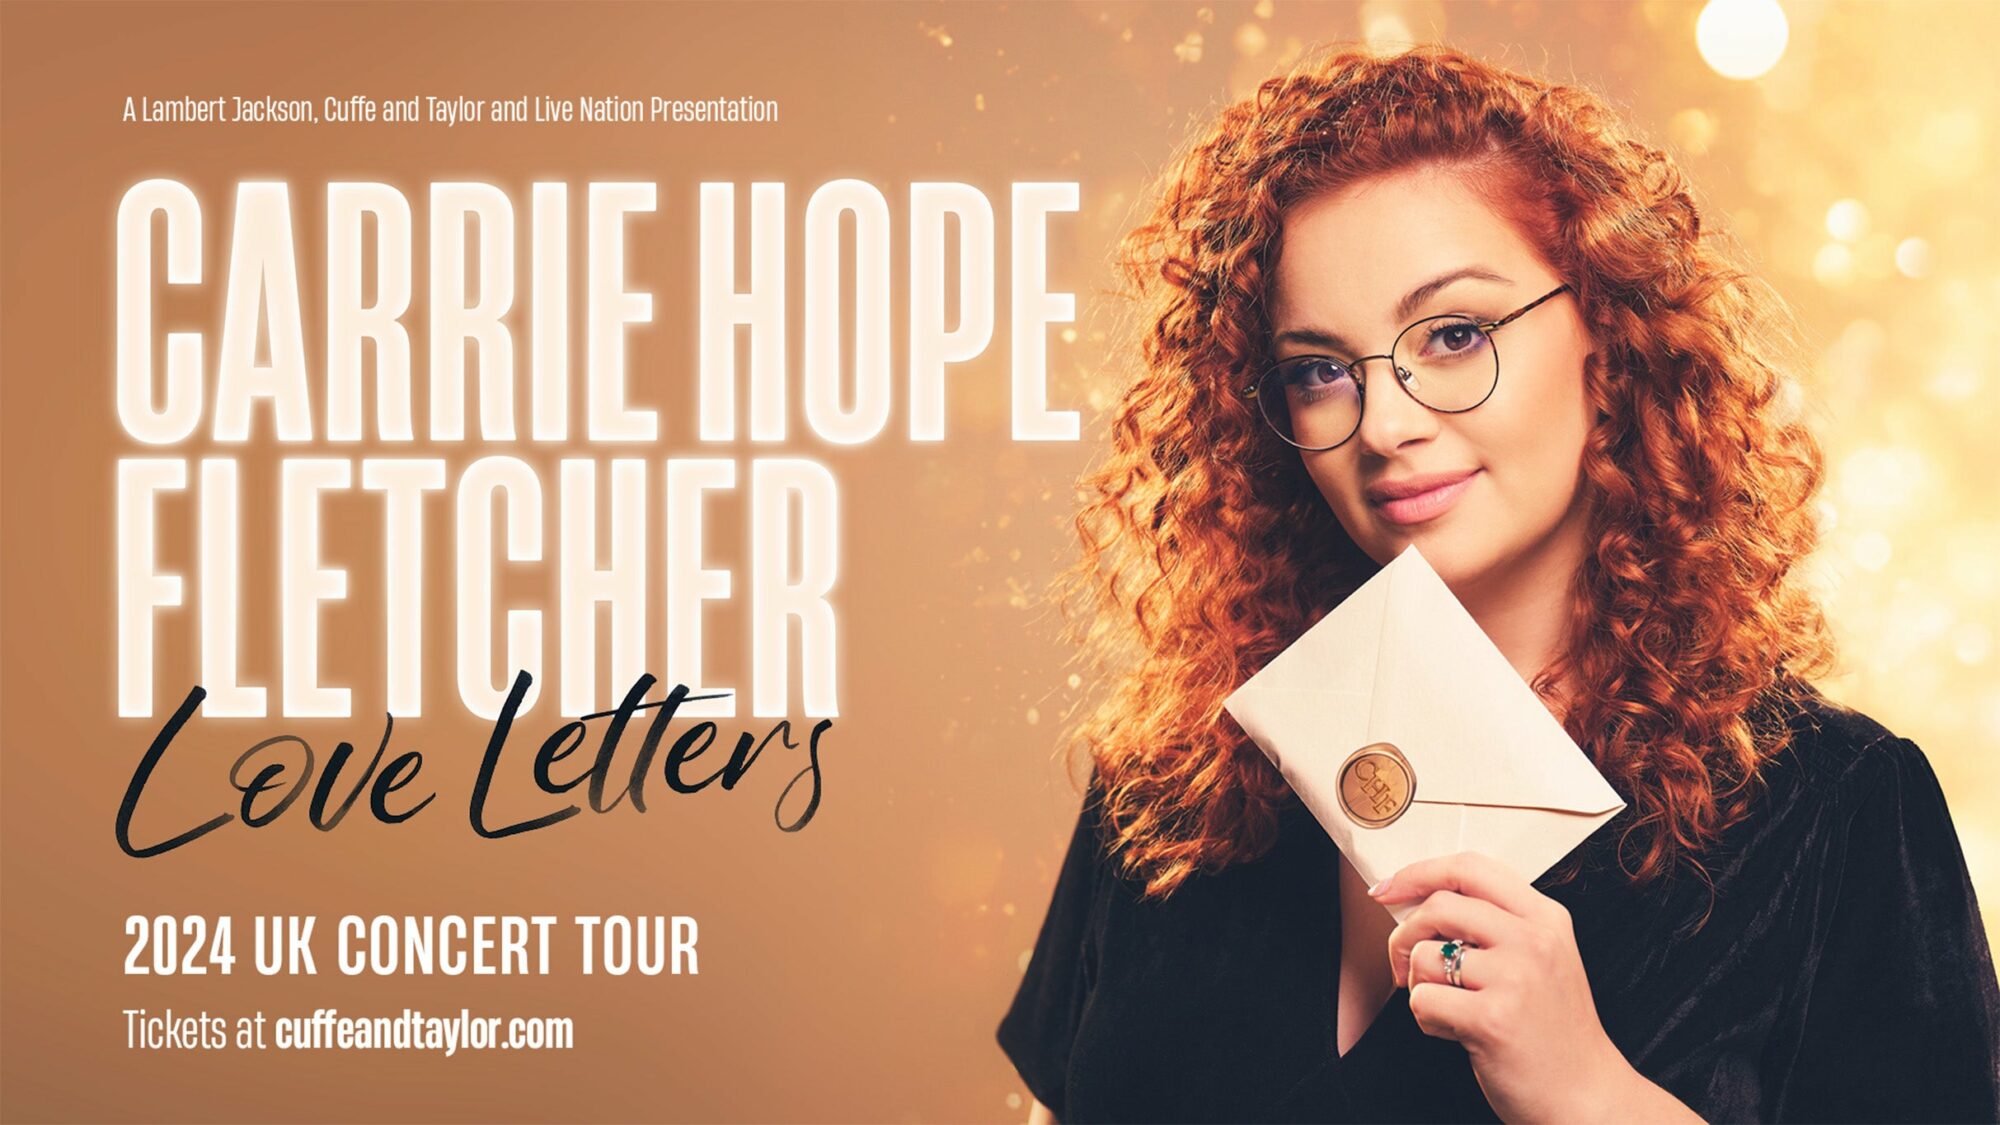 Image name Carrie Hope Fletcher Love Letters at York Barbican York the 10 image from the post Carrie Hope Fletcher - Love Letters at York Barbican, York in Yorkshire.com.